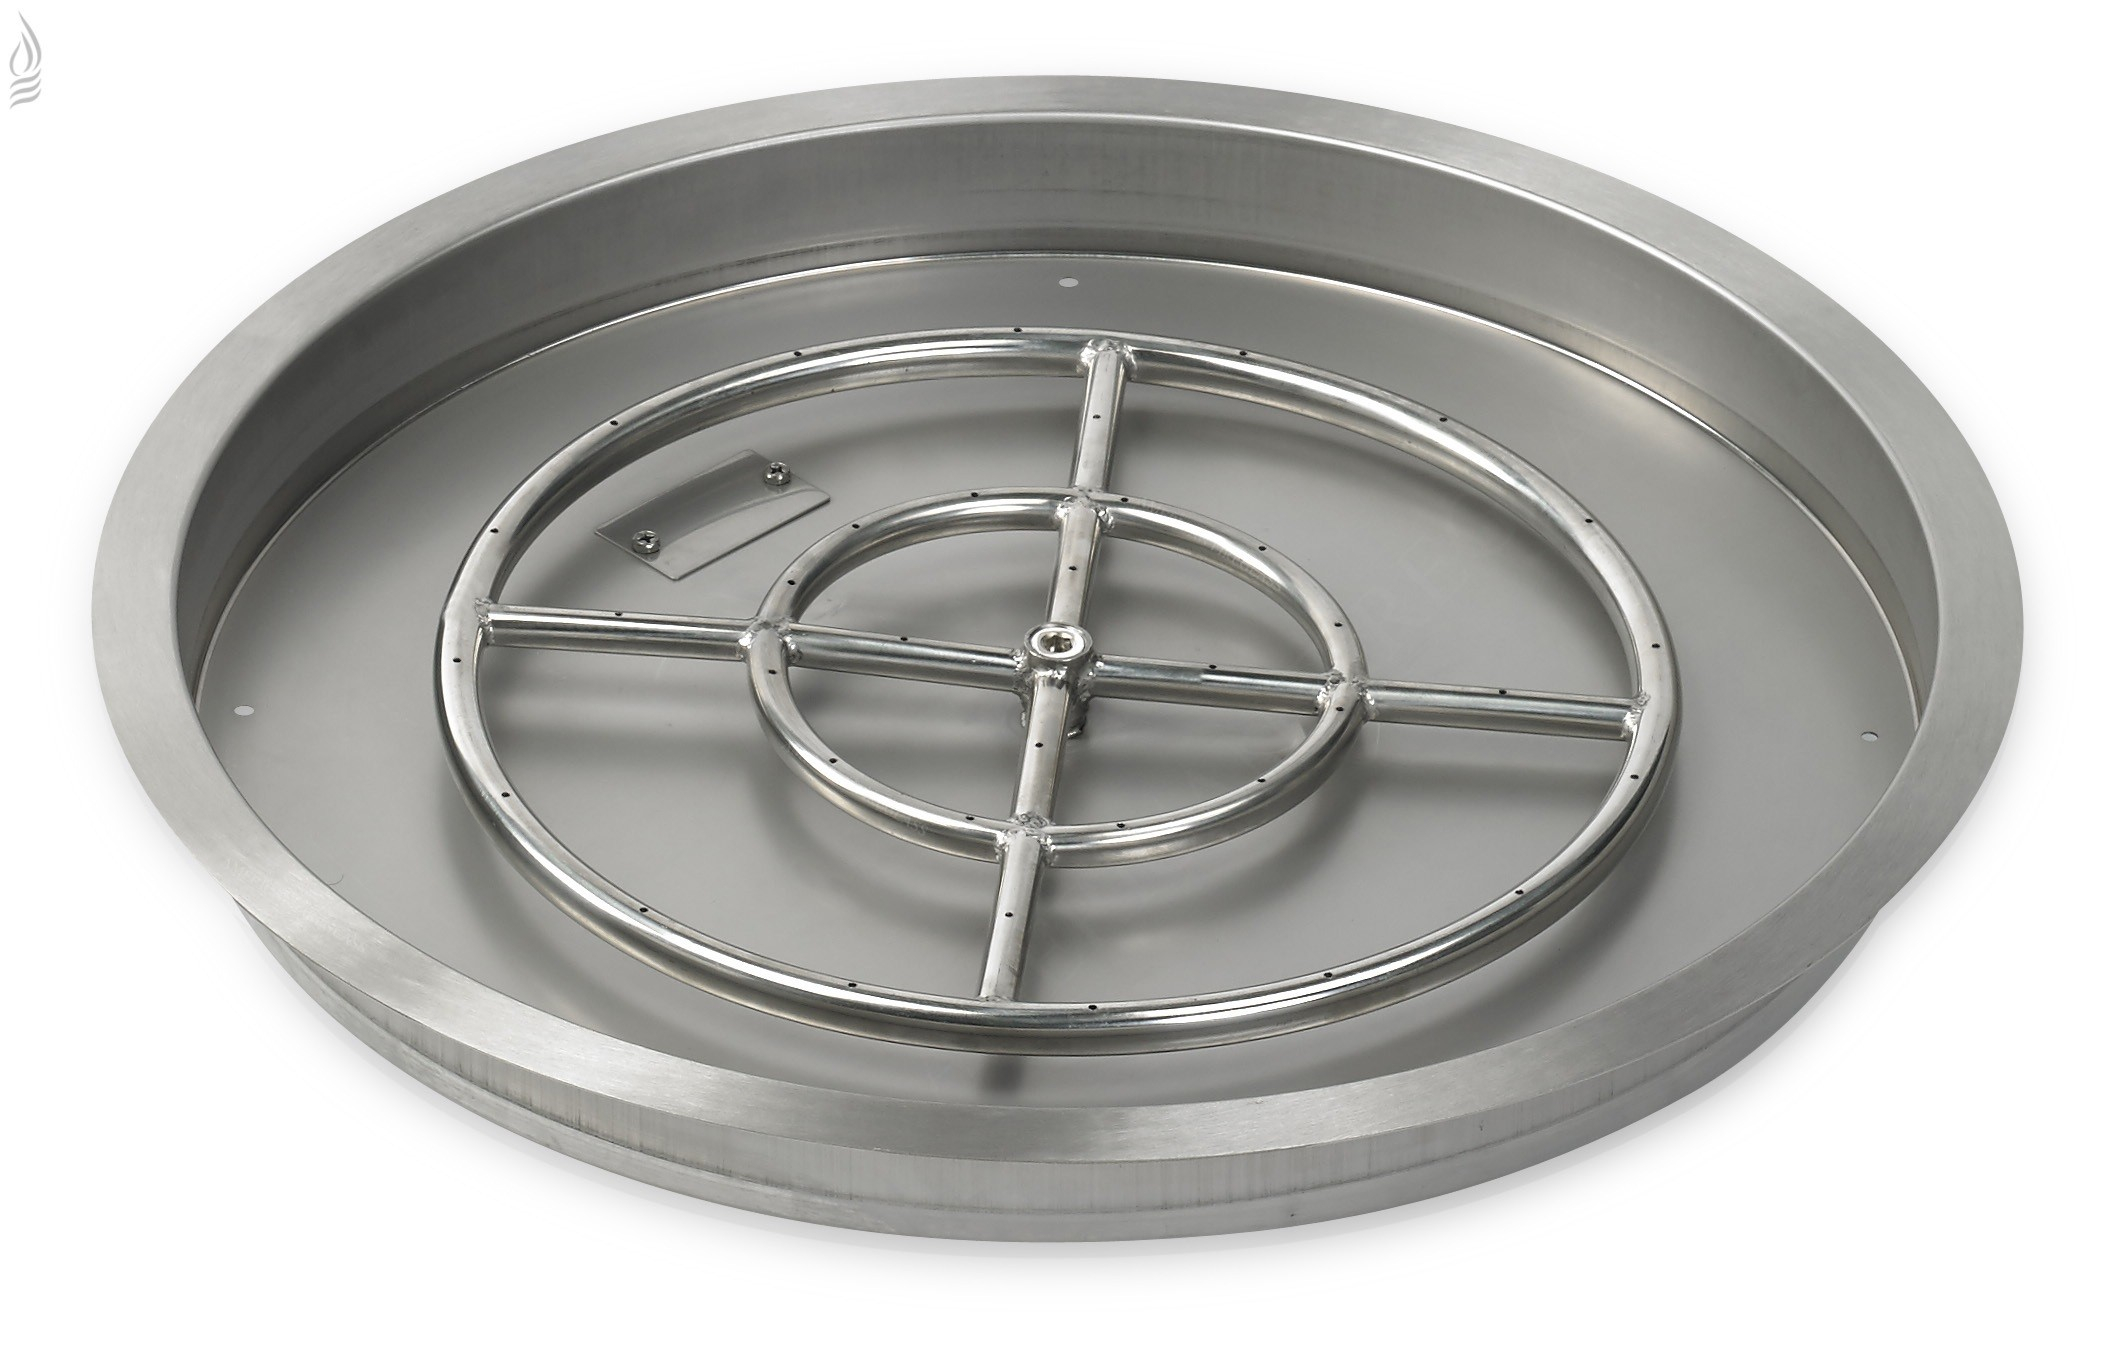 Stainless Steel Fire Pit Pan Drop In Fire Pit Allbackyardfun pertaining to size 2116 X 1351